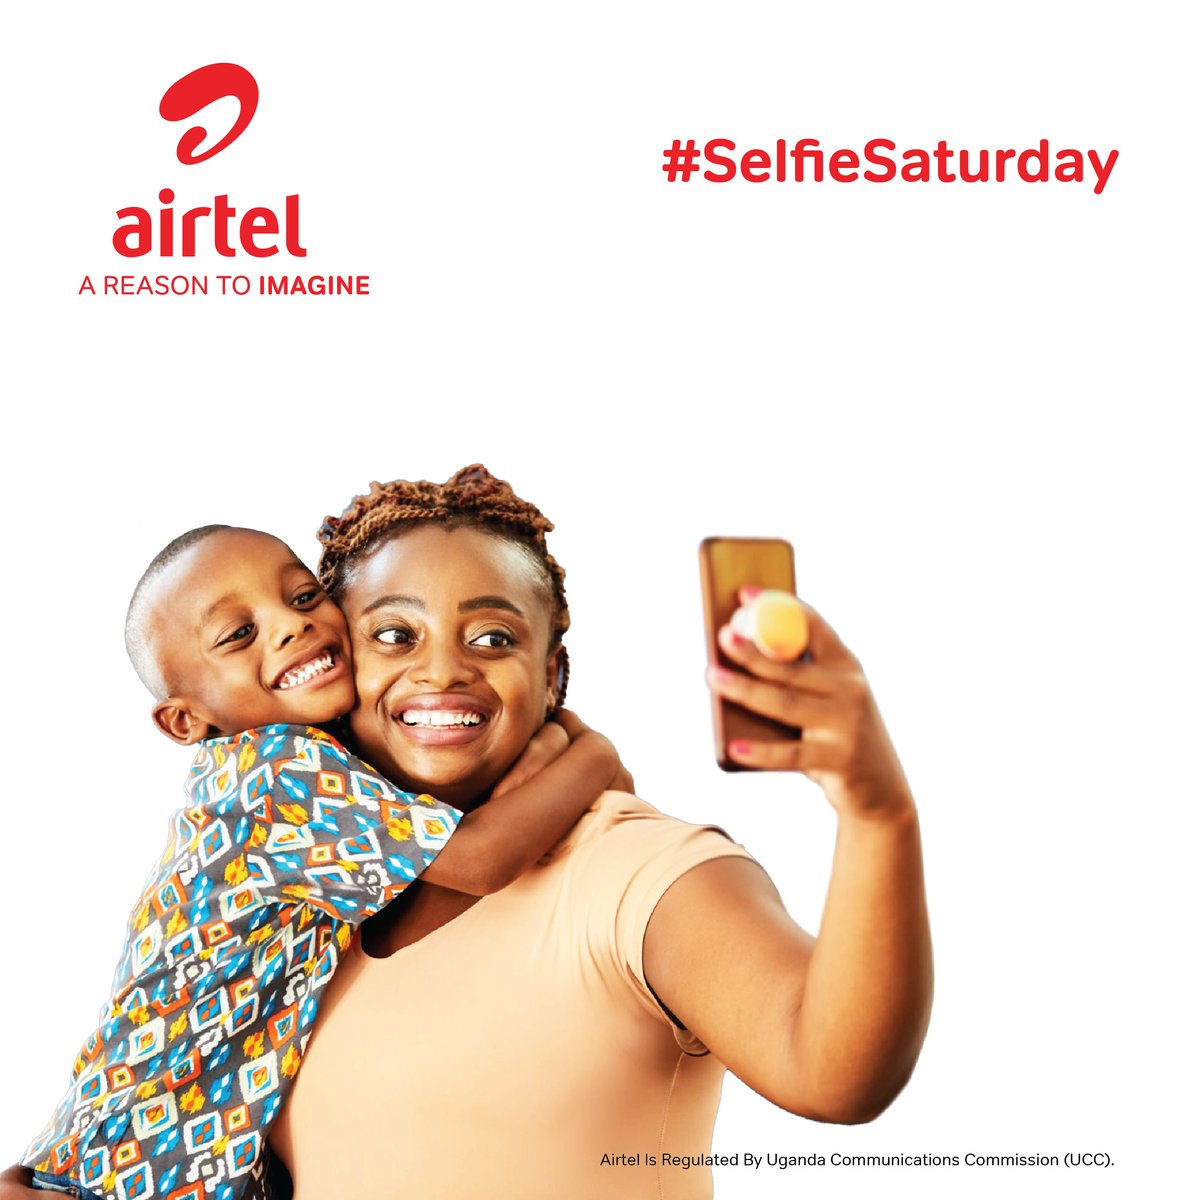 #SelfieSaturday Share a selfie showing how you are spending your Saturday. Admin has a bundle for you